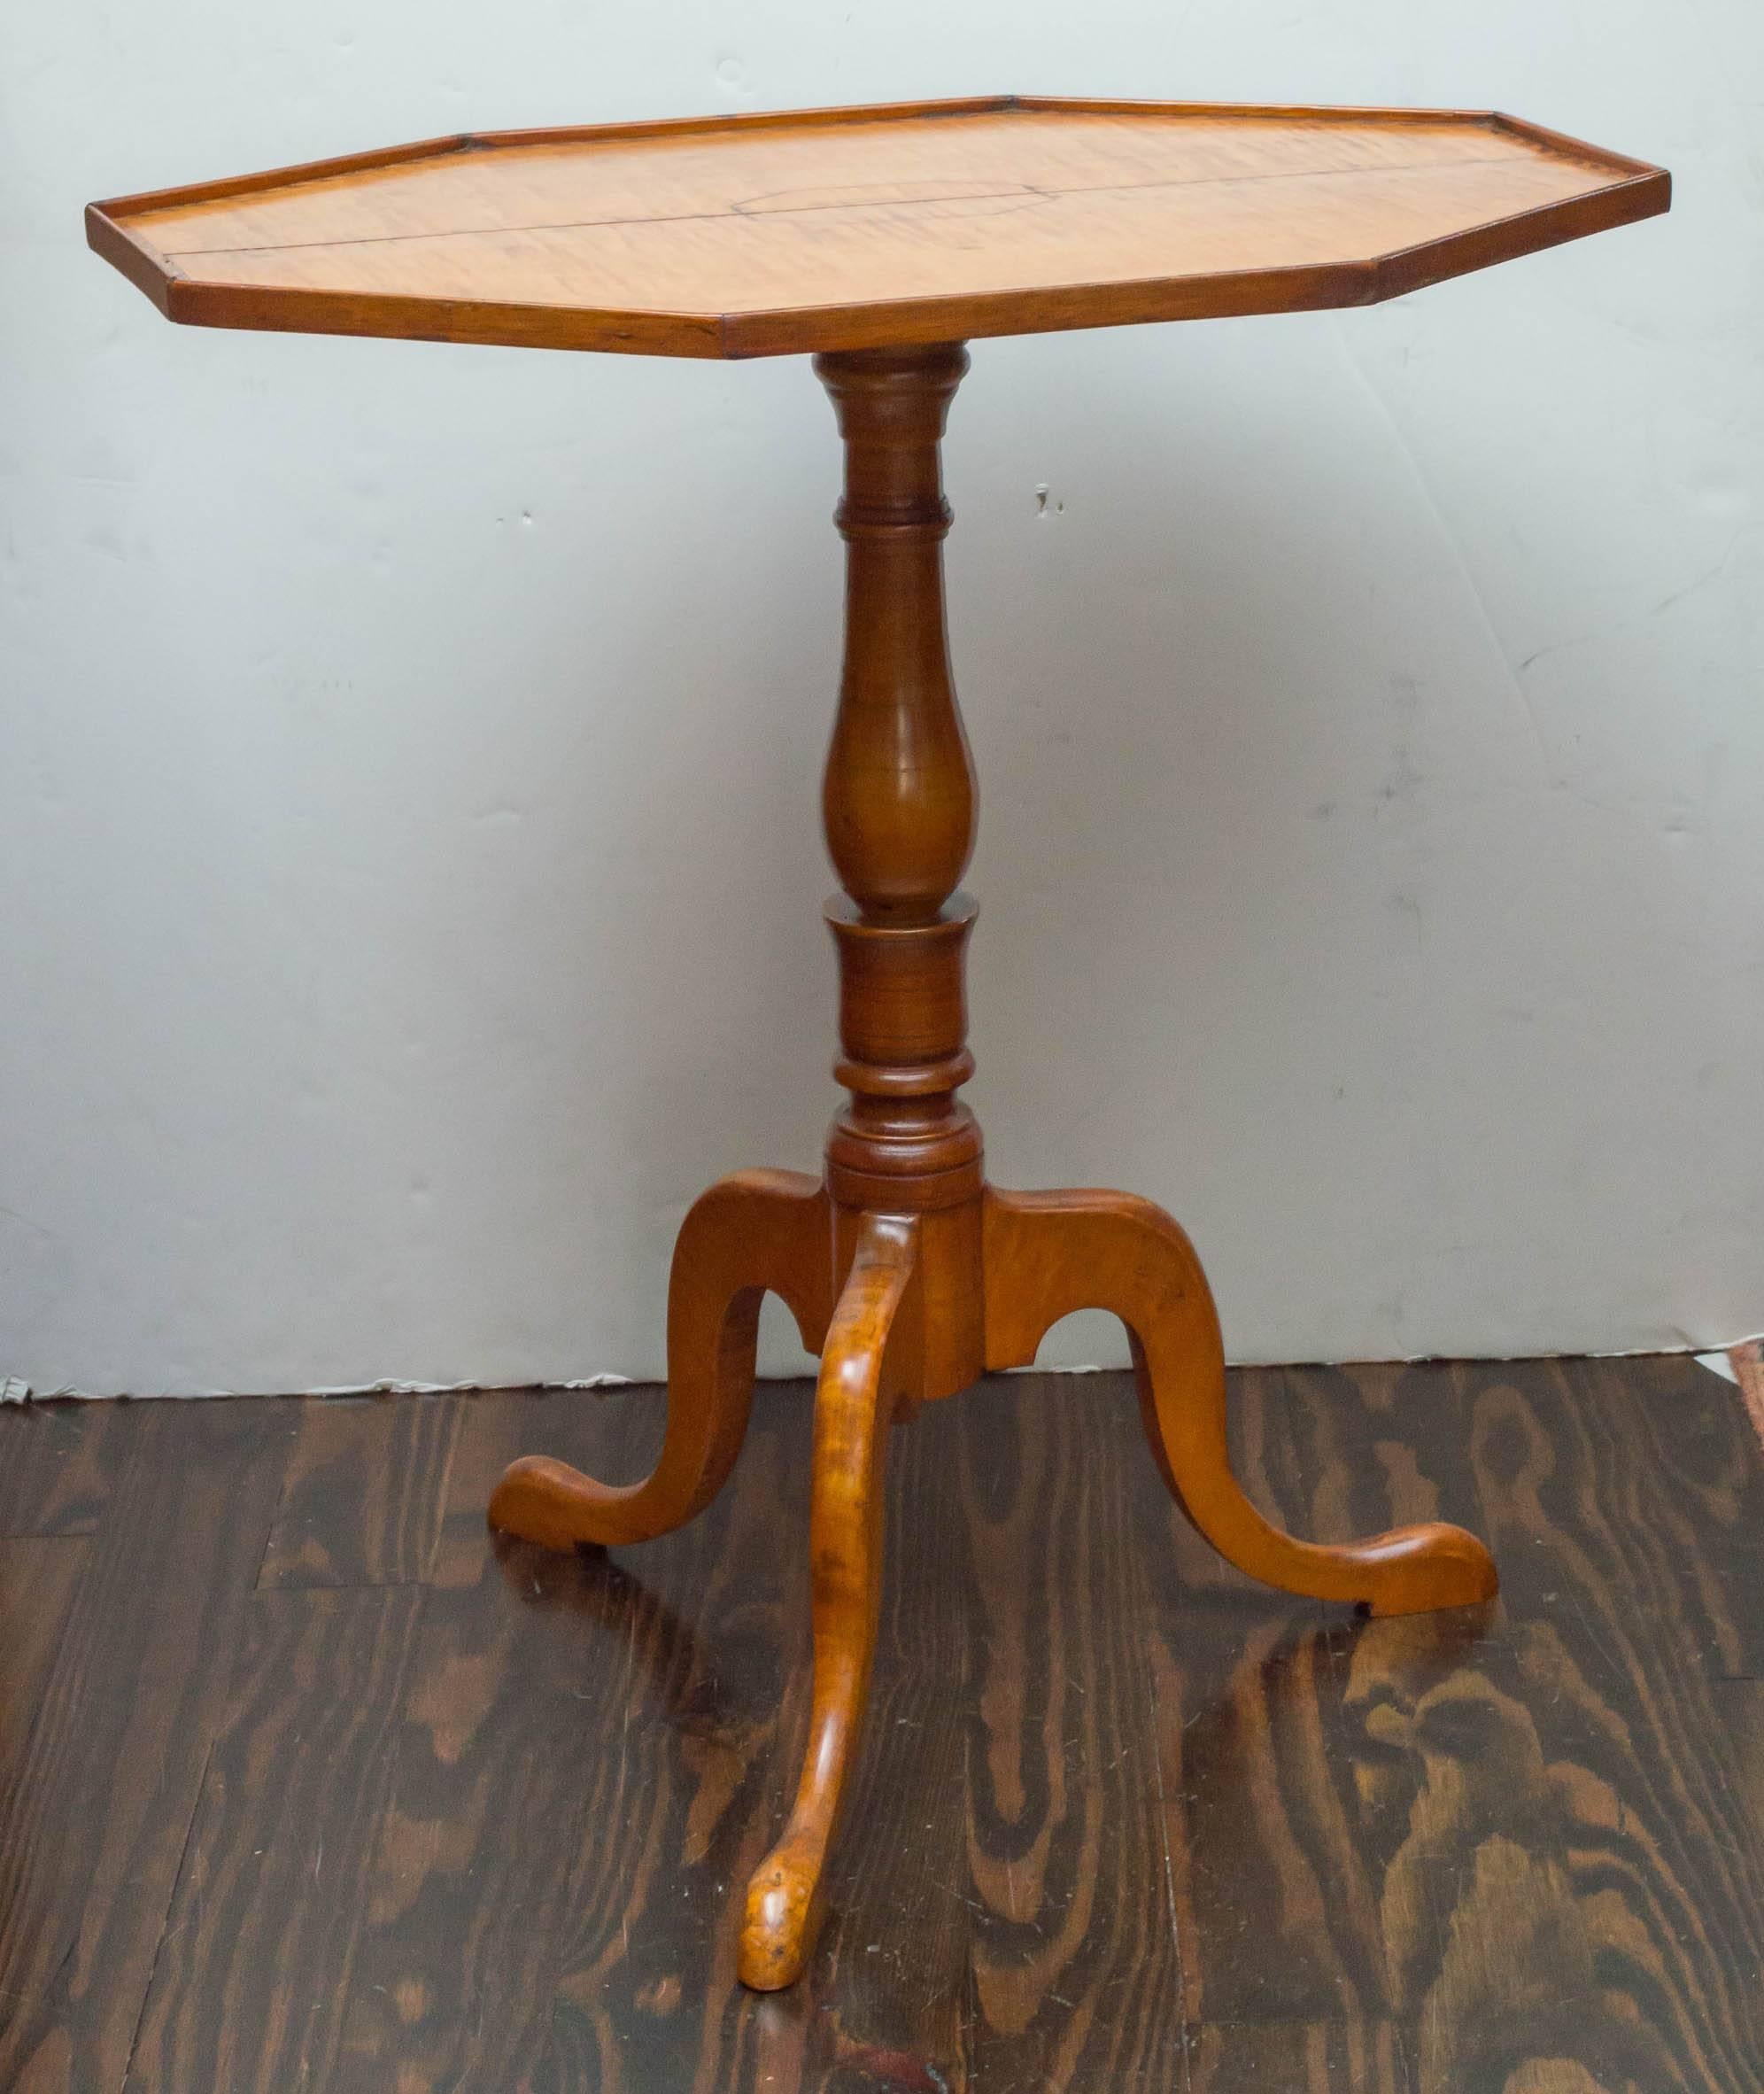 Late 18th century American tiger maple, tilt top, candle stand. The rectangular octagon shaped top is decorated with a walnut stripe inlaid border and central reserve. The two board matched top is made of solid boards with good figured stripes. A